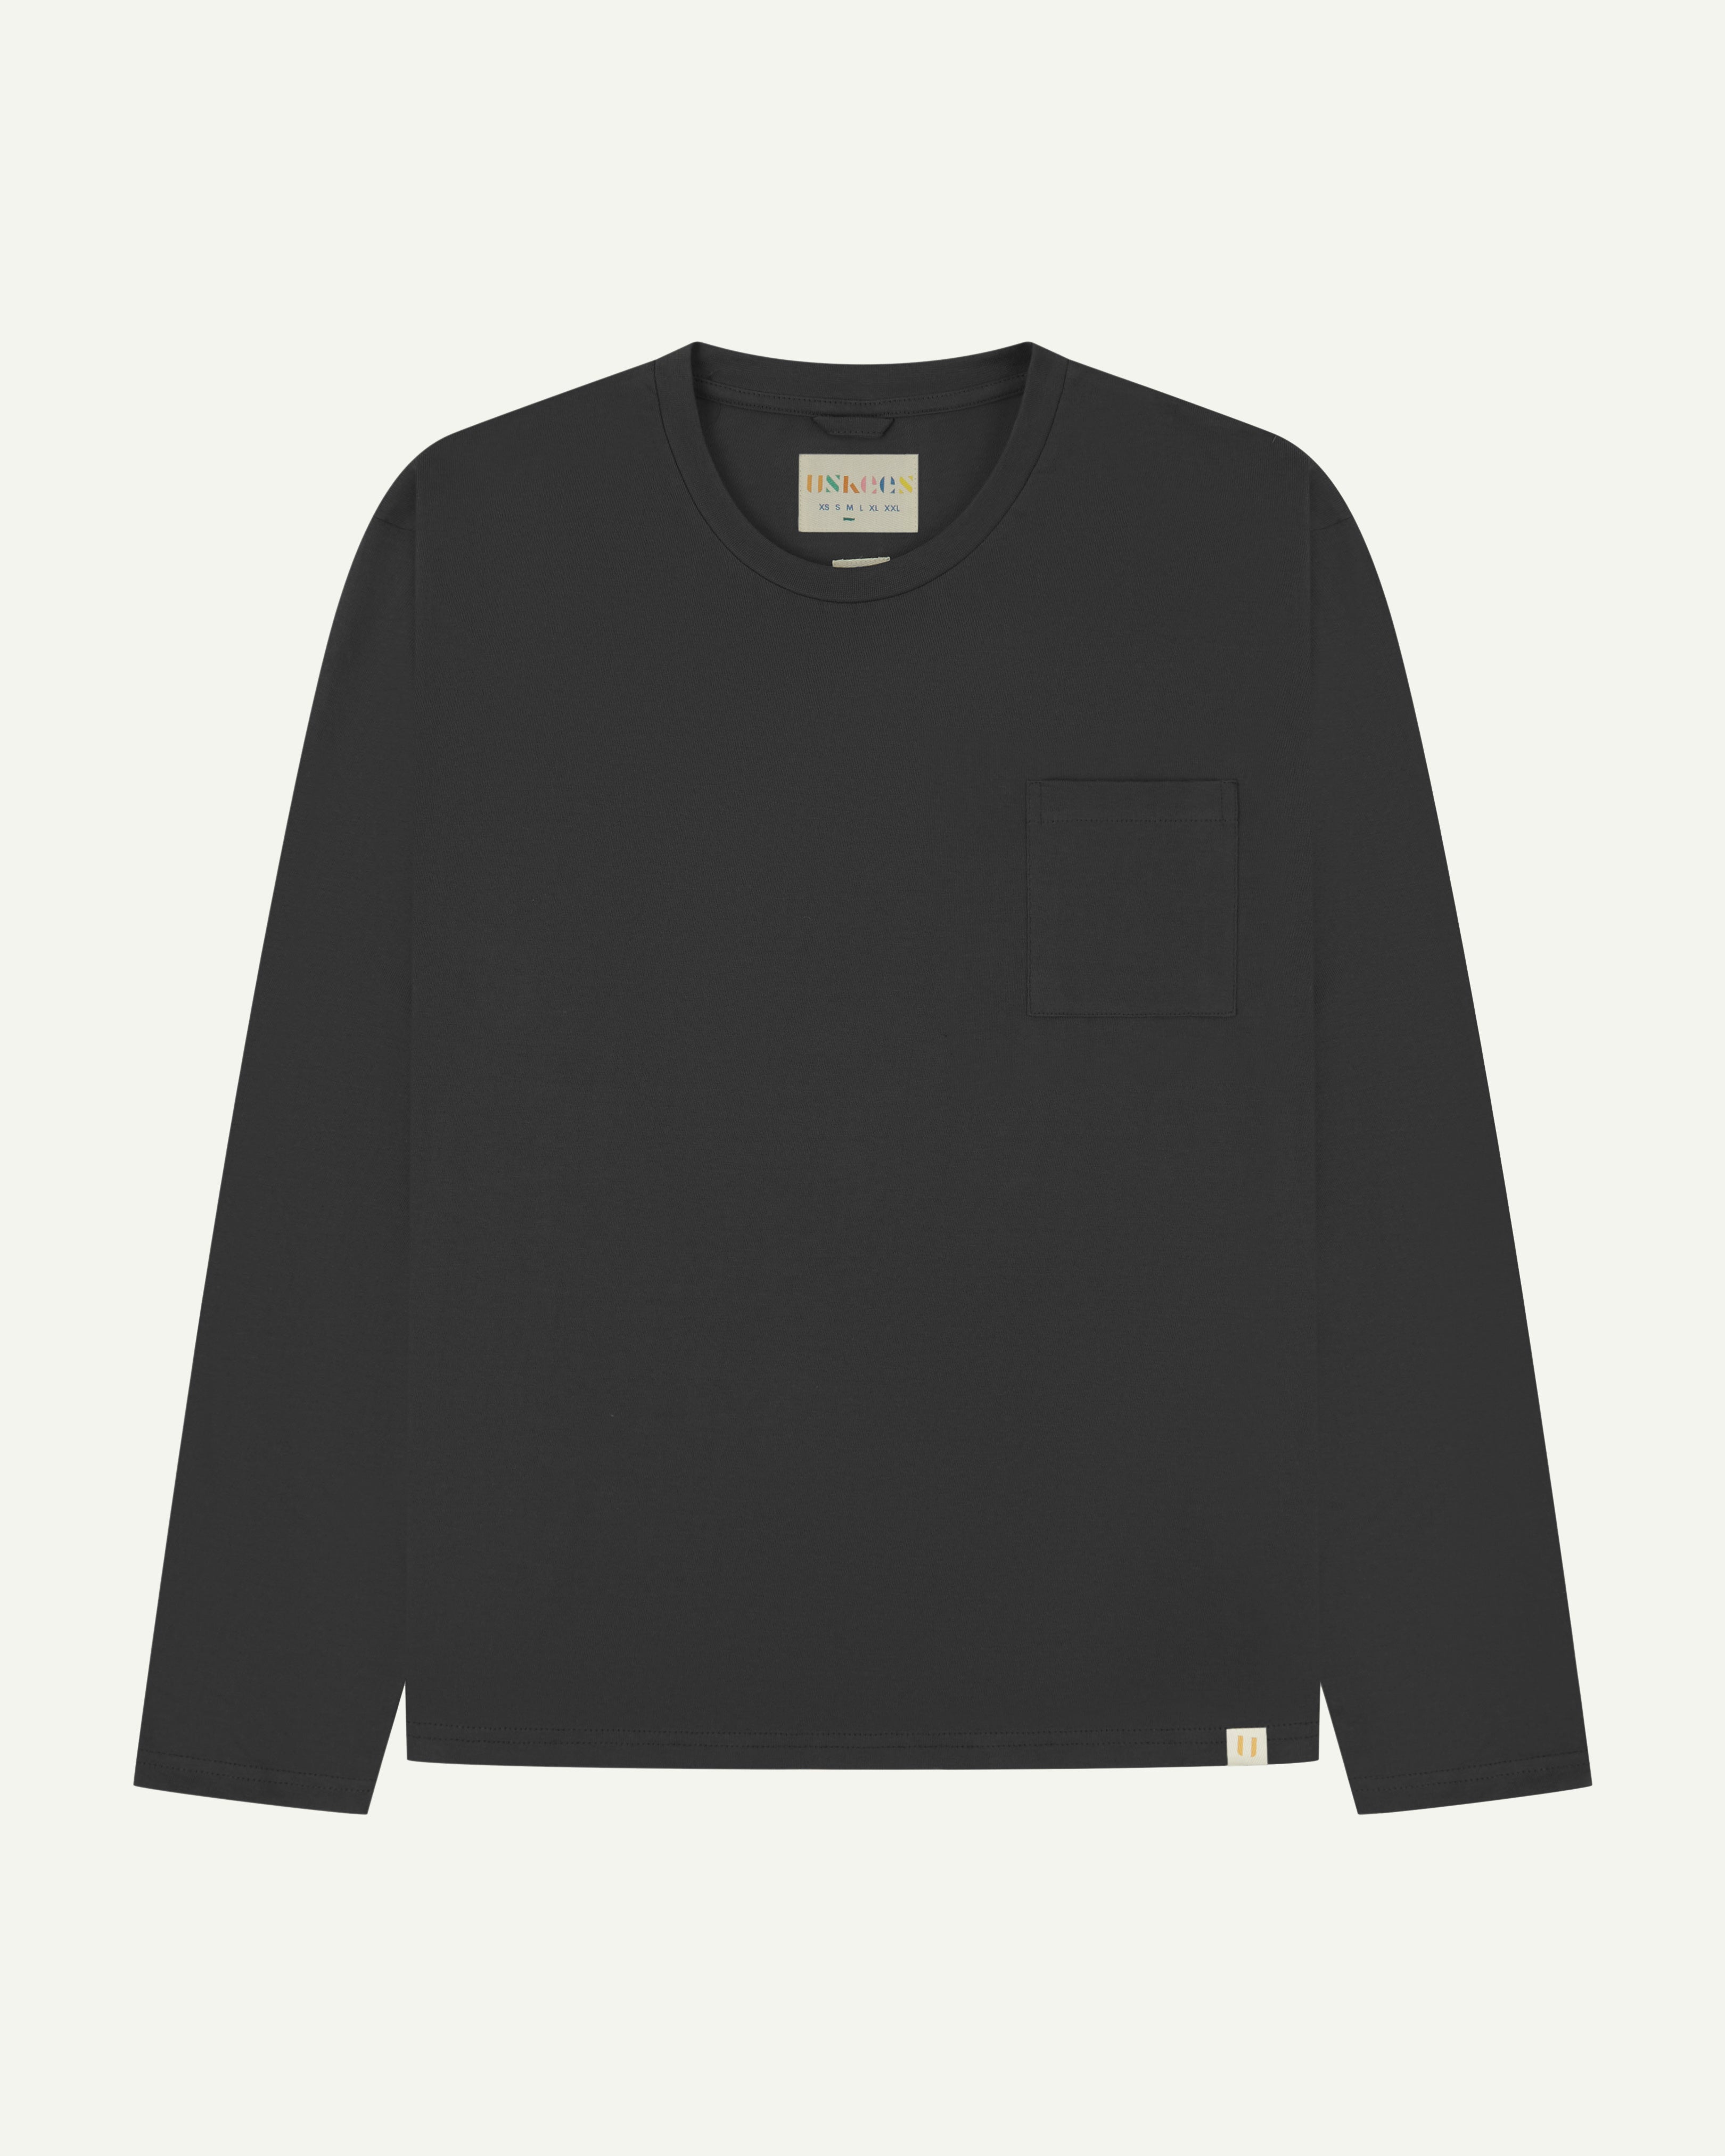 Front flat shot of long sleeve Uskees t-shirt in faded black showing breast pocket and discreet Uskees branding at hem